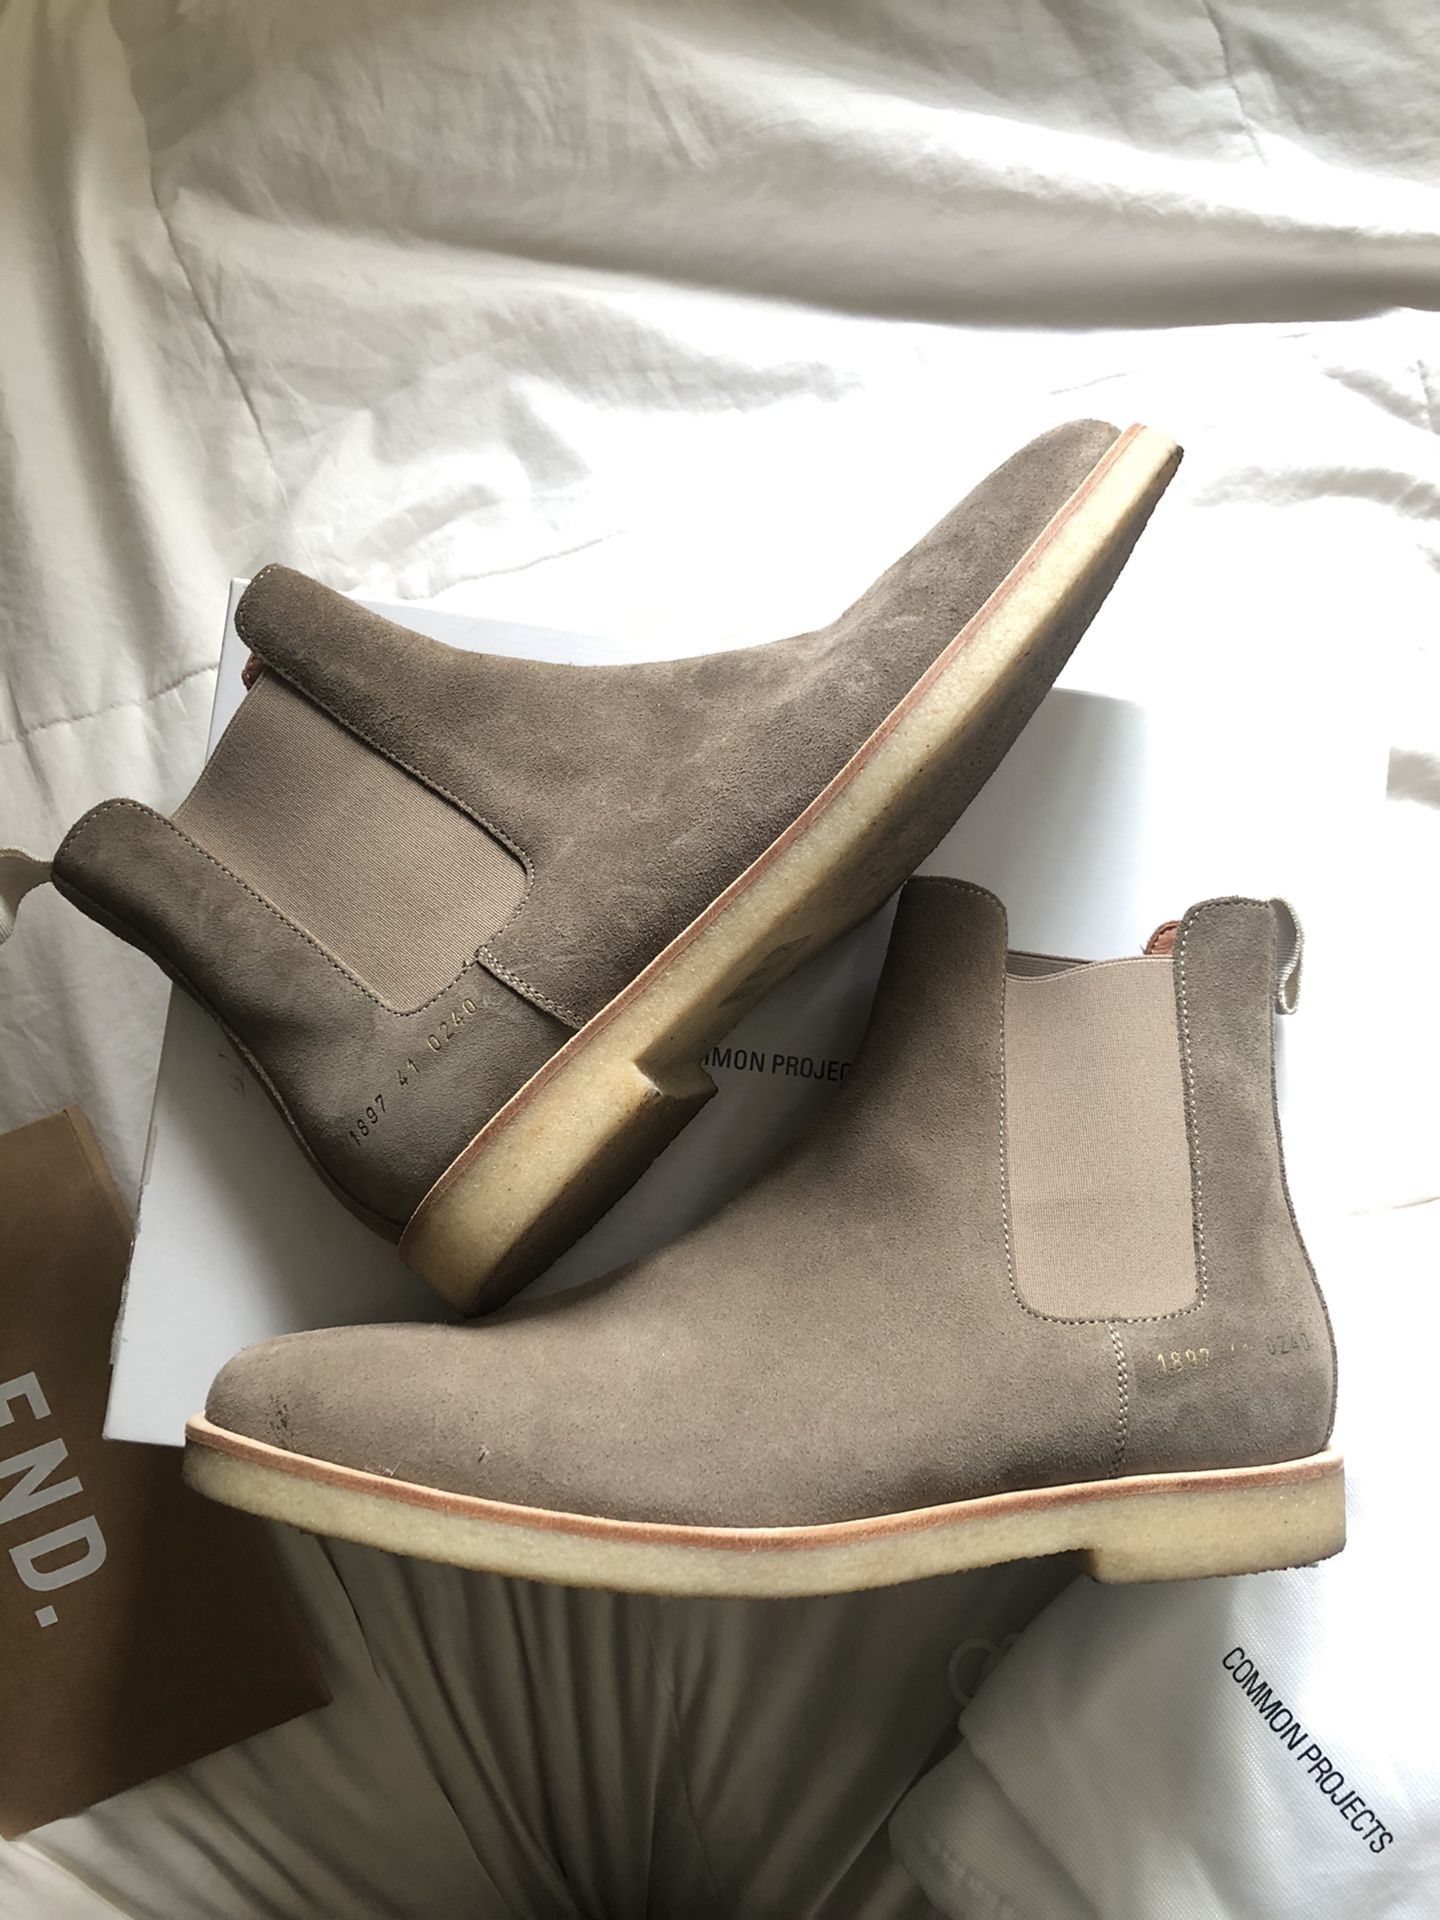 Common Projects, Chelsea Boots, Taupe, UK 7 (size 9)